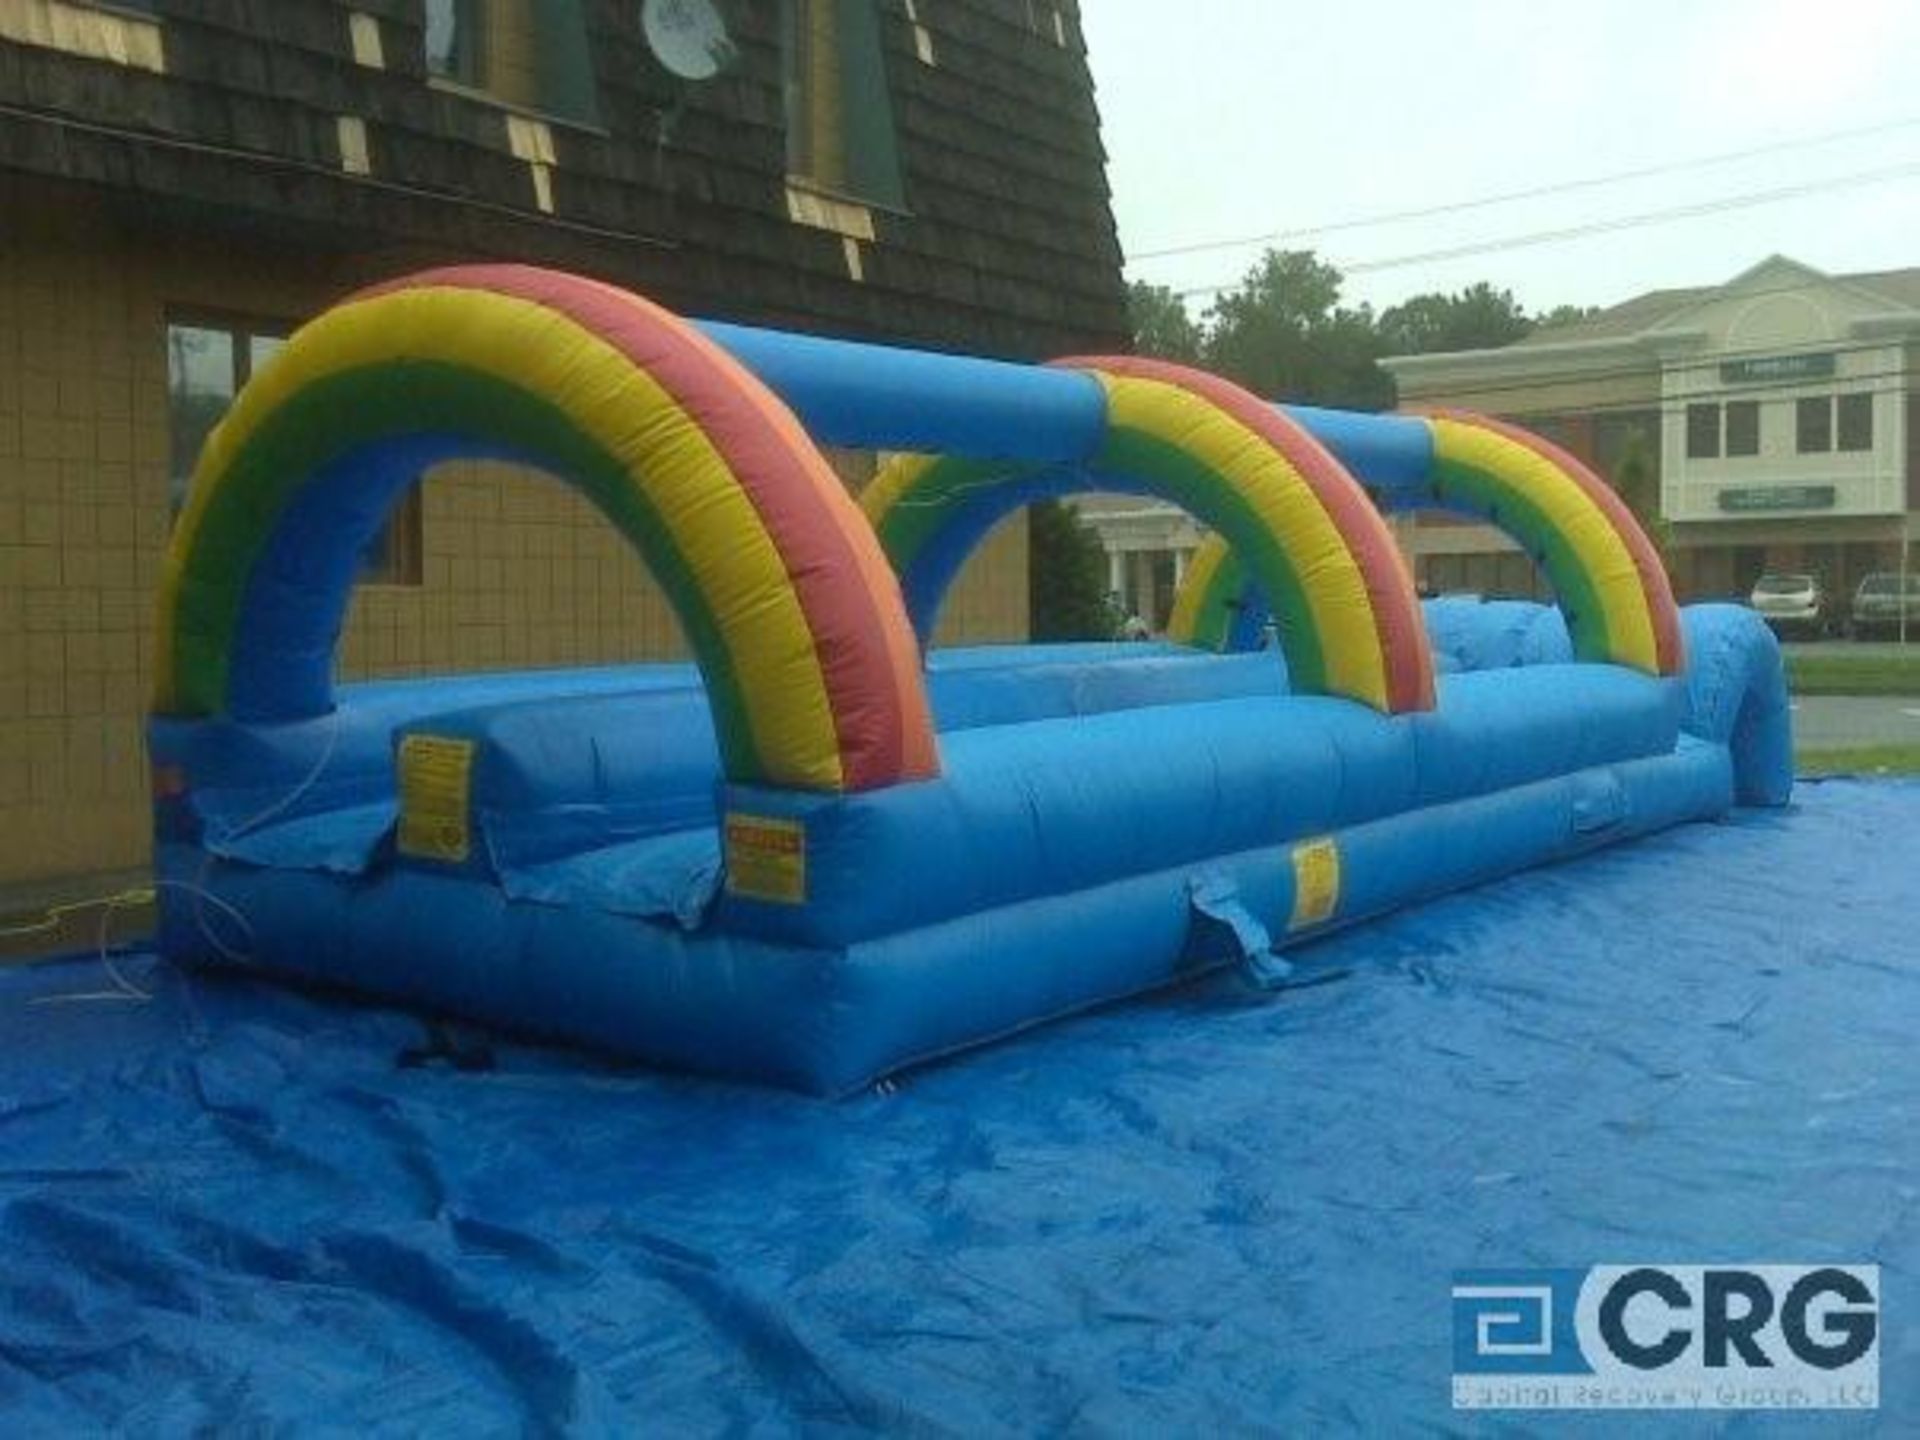 Inflatable Slip and Slide